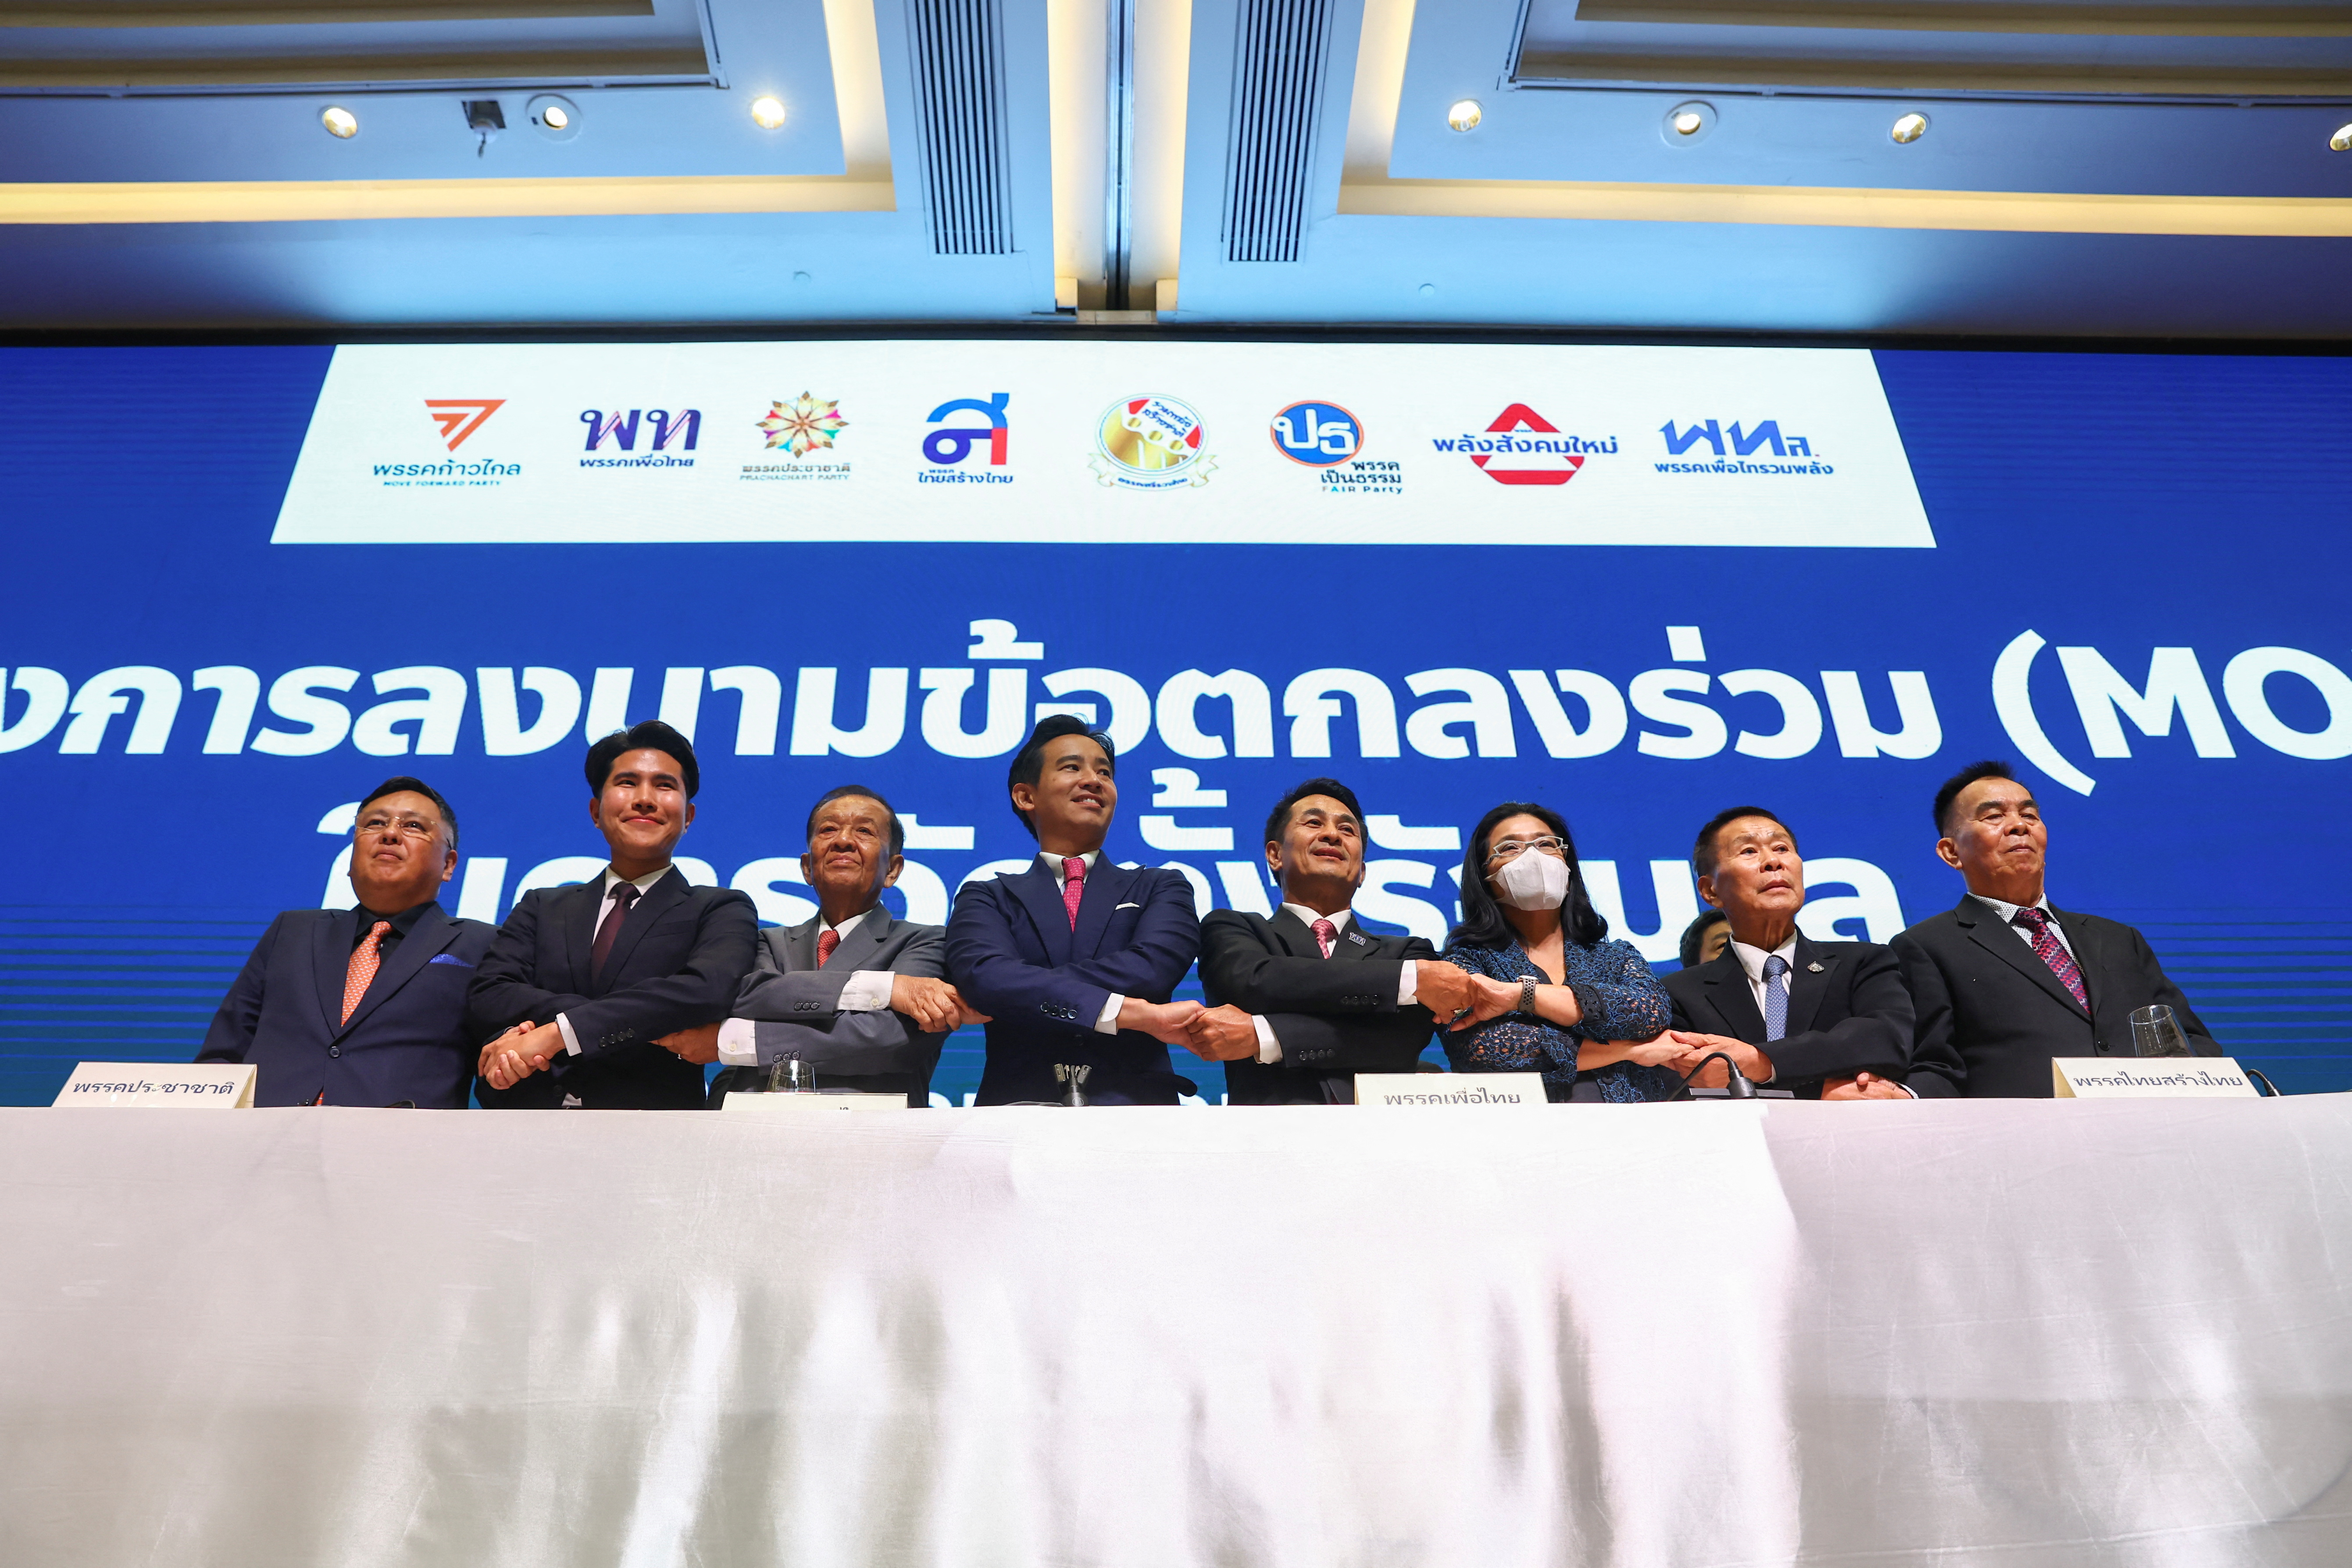 Thailand's Move Forward Party holds a press conference on coalition agreement, in Bangkok